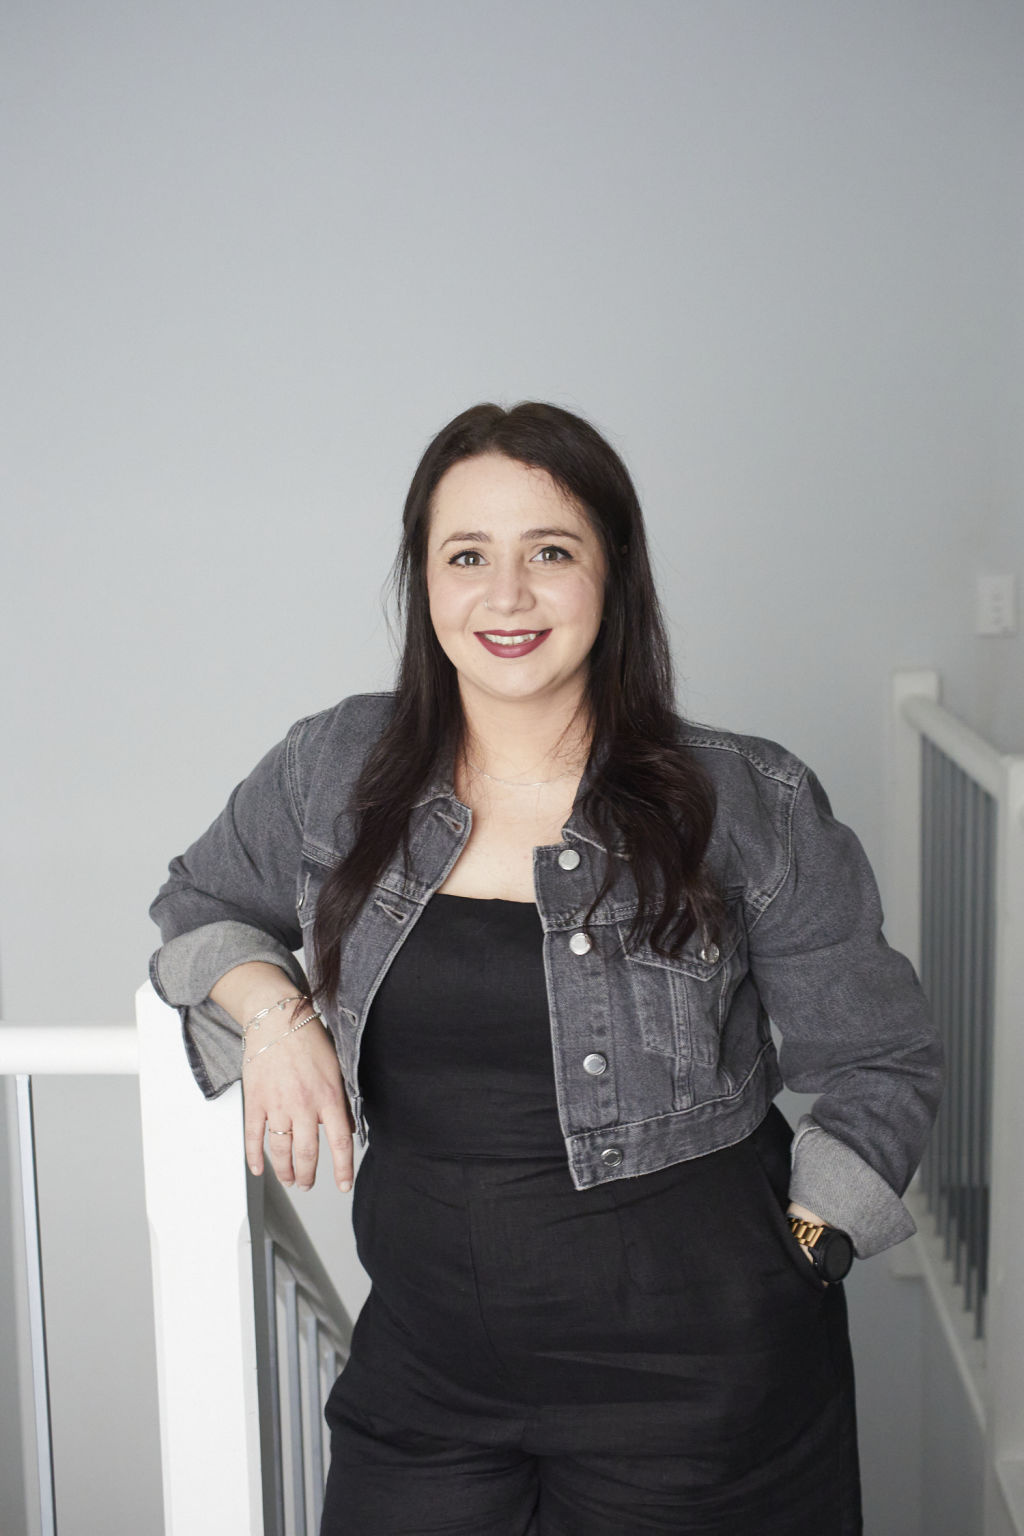 Sydney-based technical project manager Stacey Mathews is one of the many first-home buyers who struggled to save up for a 20 per cent deposit. It has taken her a decade to save, and she only managed about 18 per cent before finally deciding to buy. Photo: Nicky Ryan